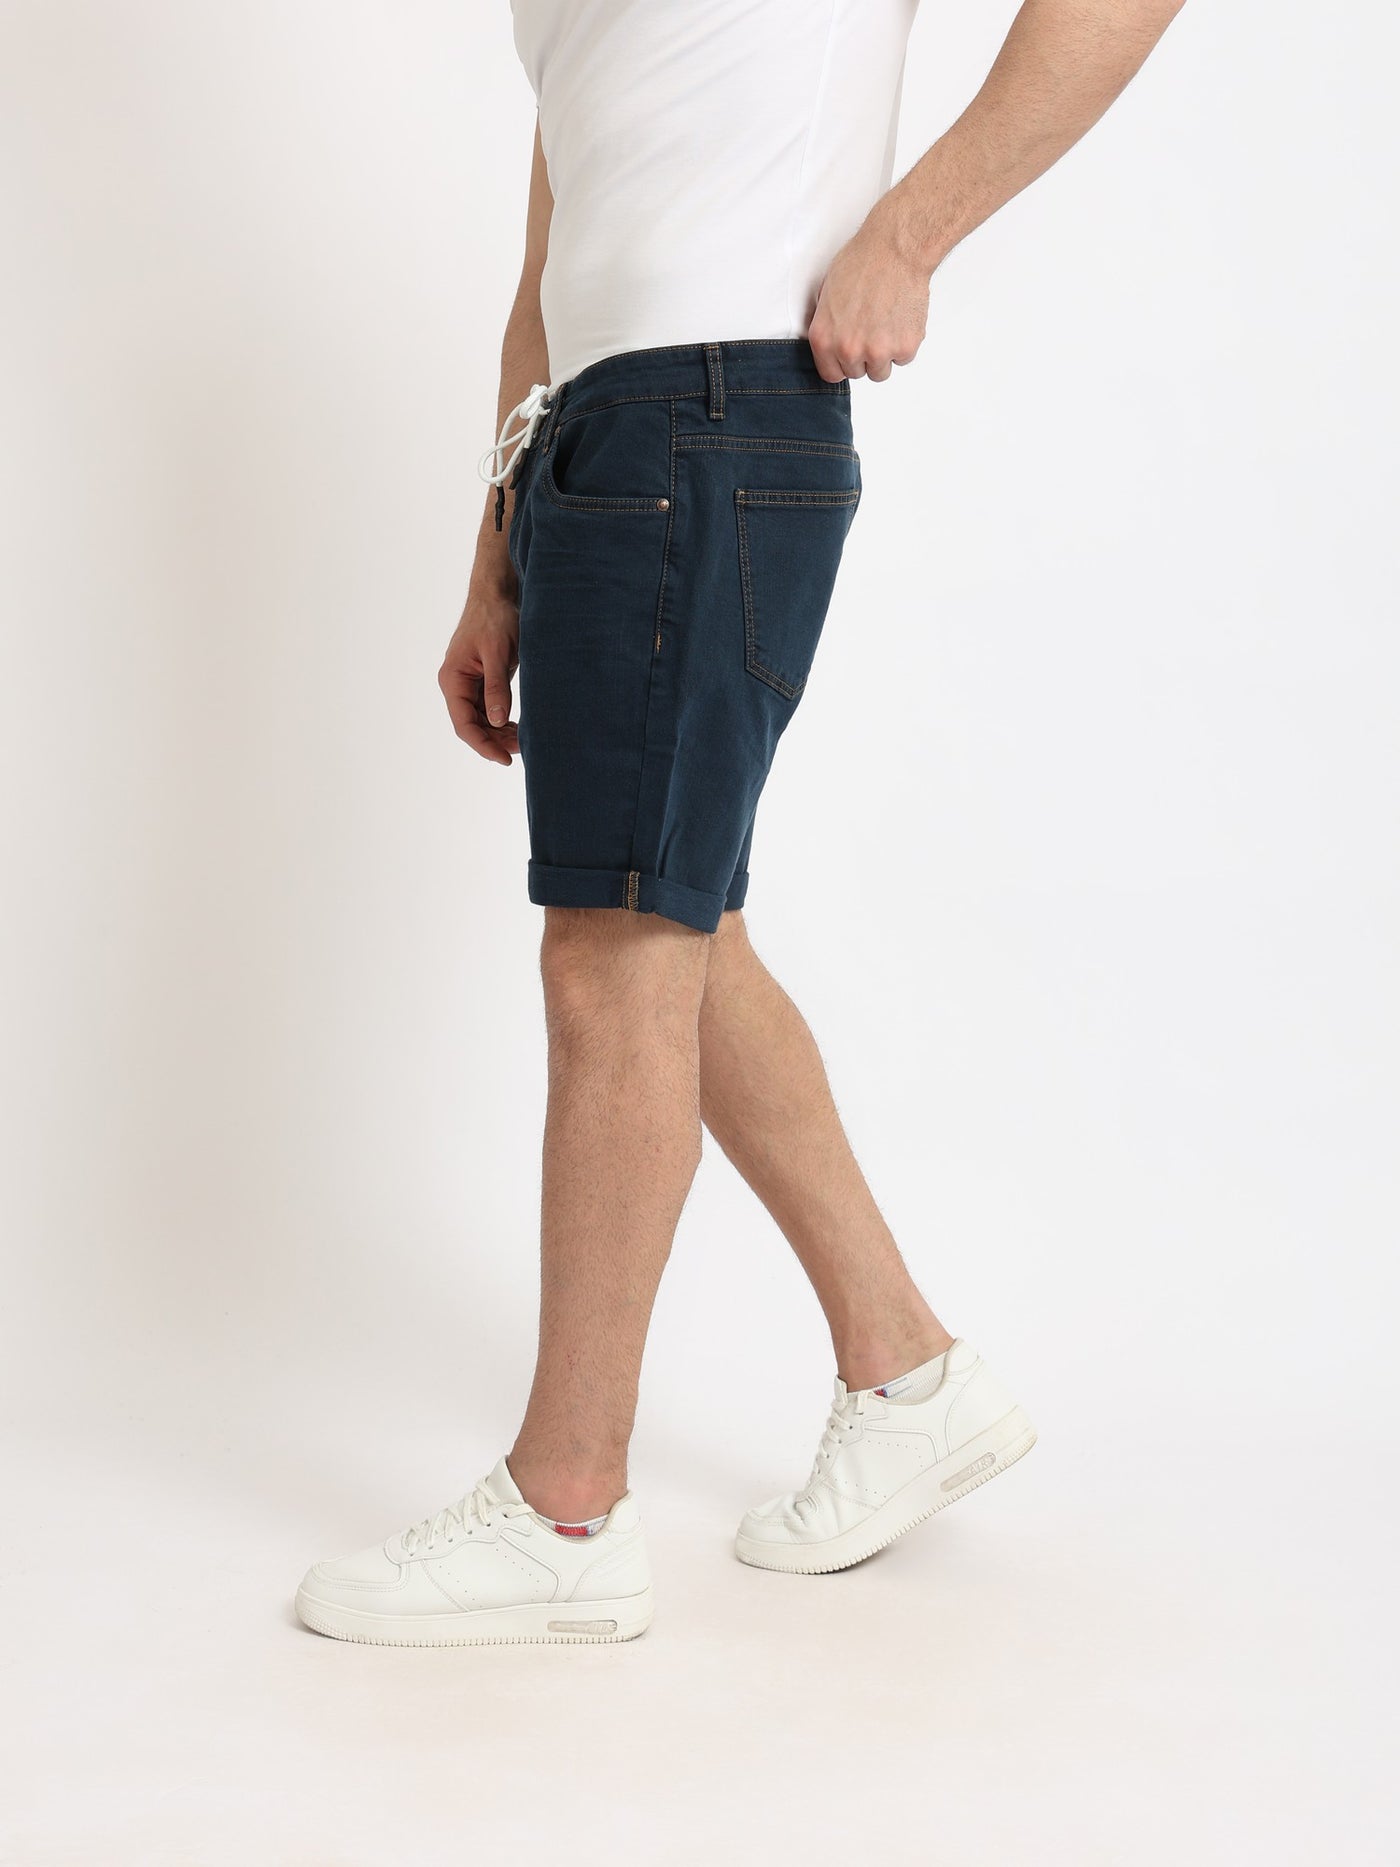 Jeans Short - Drawstring - With Pockets